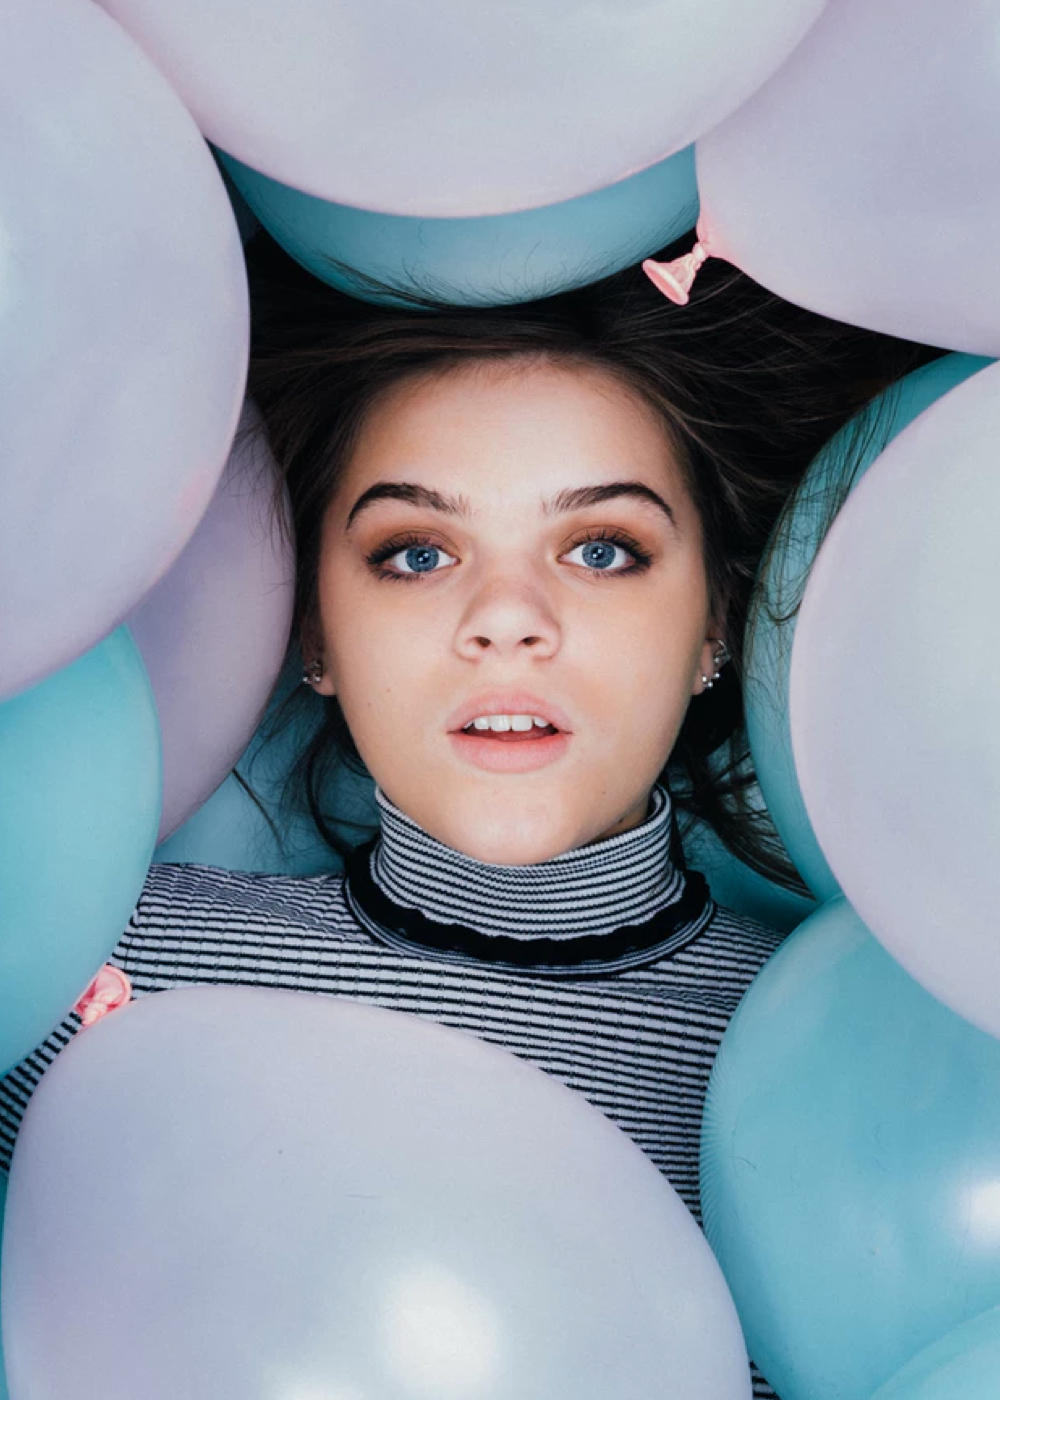 A photo of Harper starring straight into the camera surrounded by teal and pink balloons. Her hair is dark brown, her eyes are steel blue, and her mouth is slightly agape.